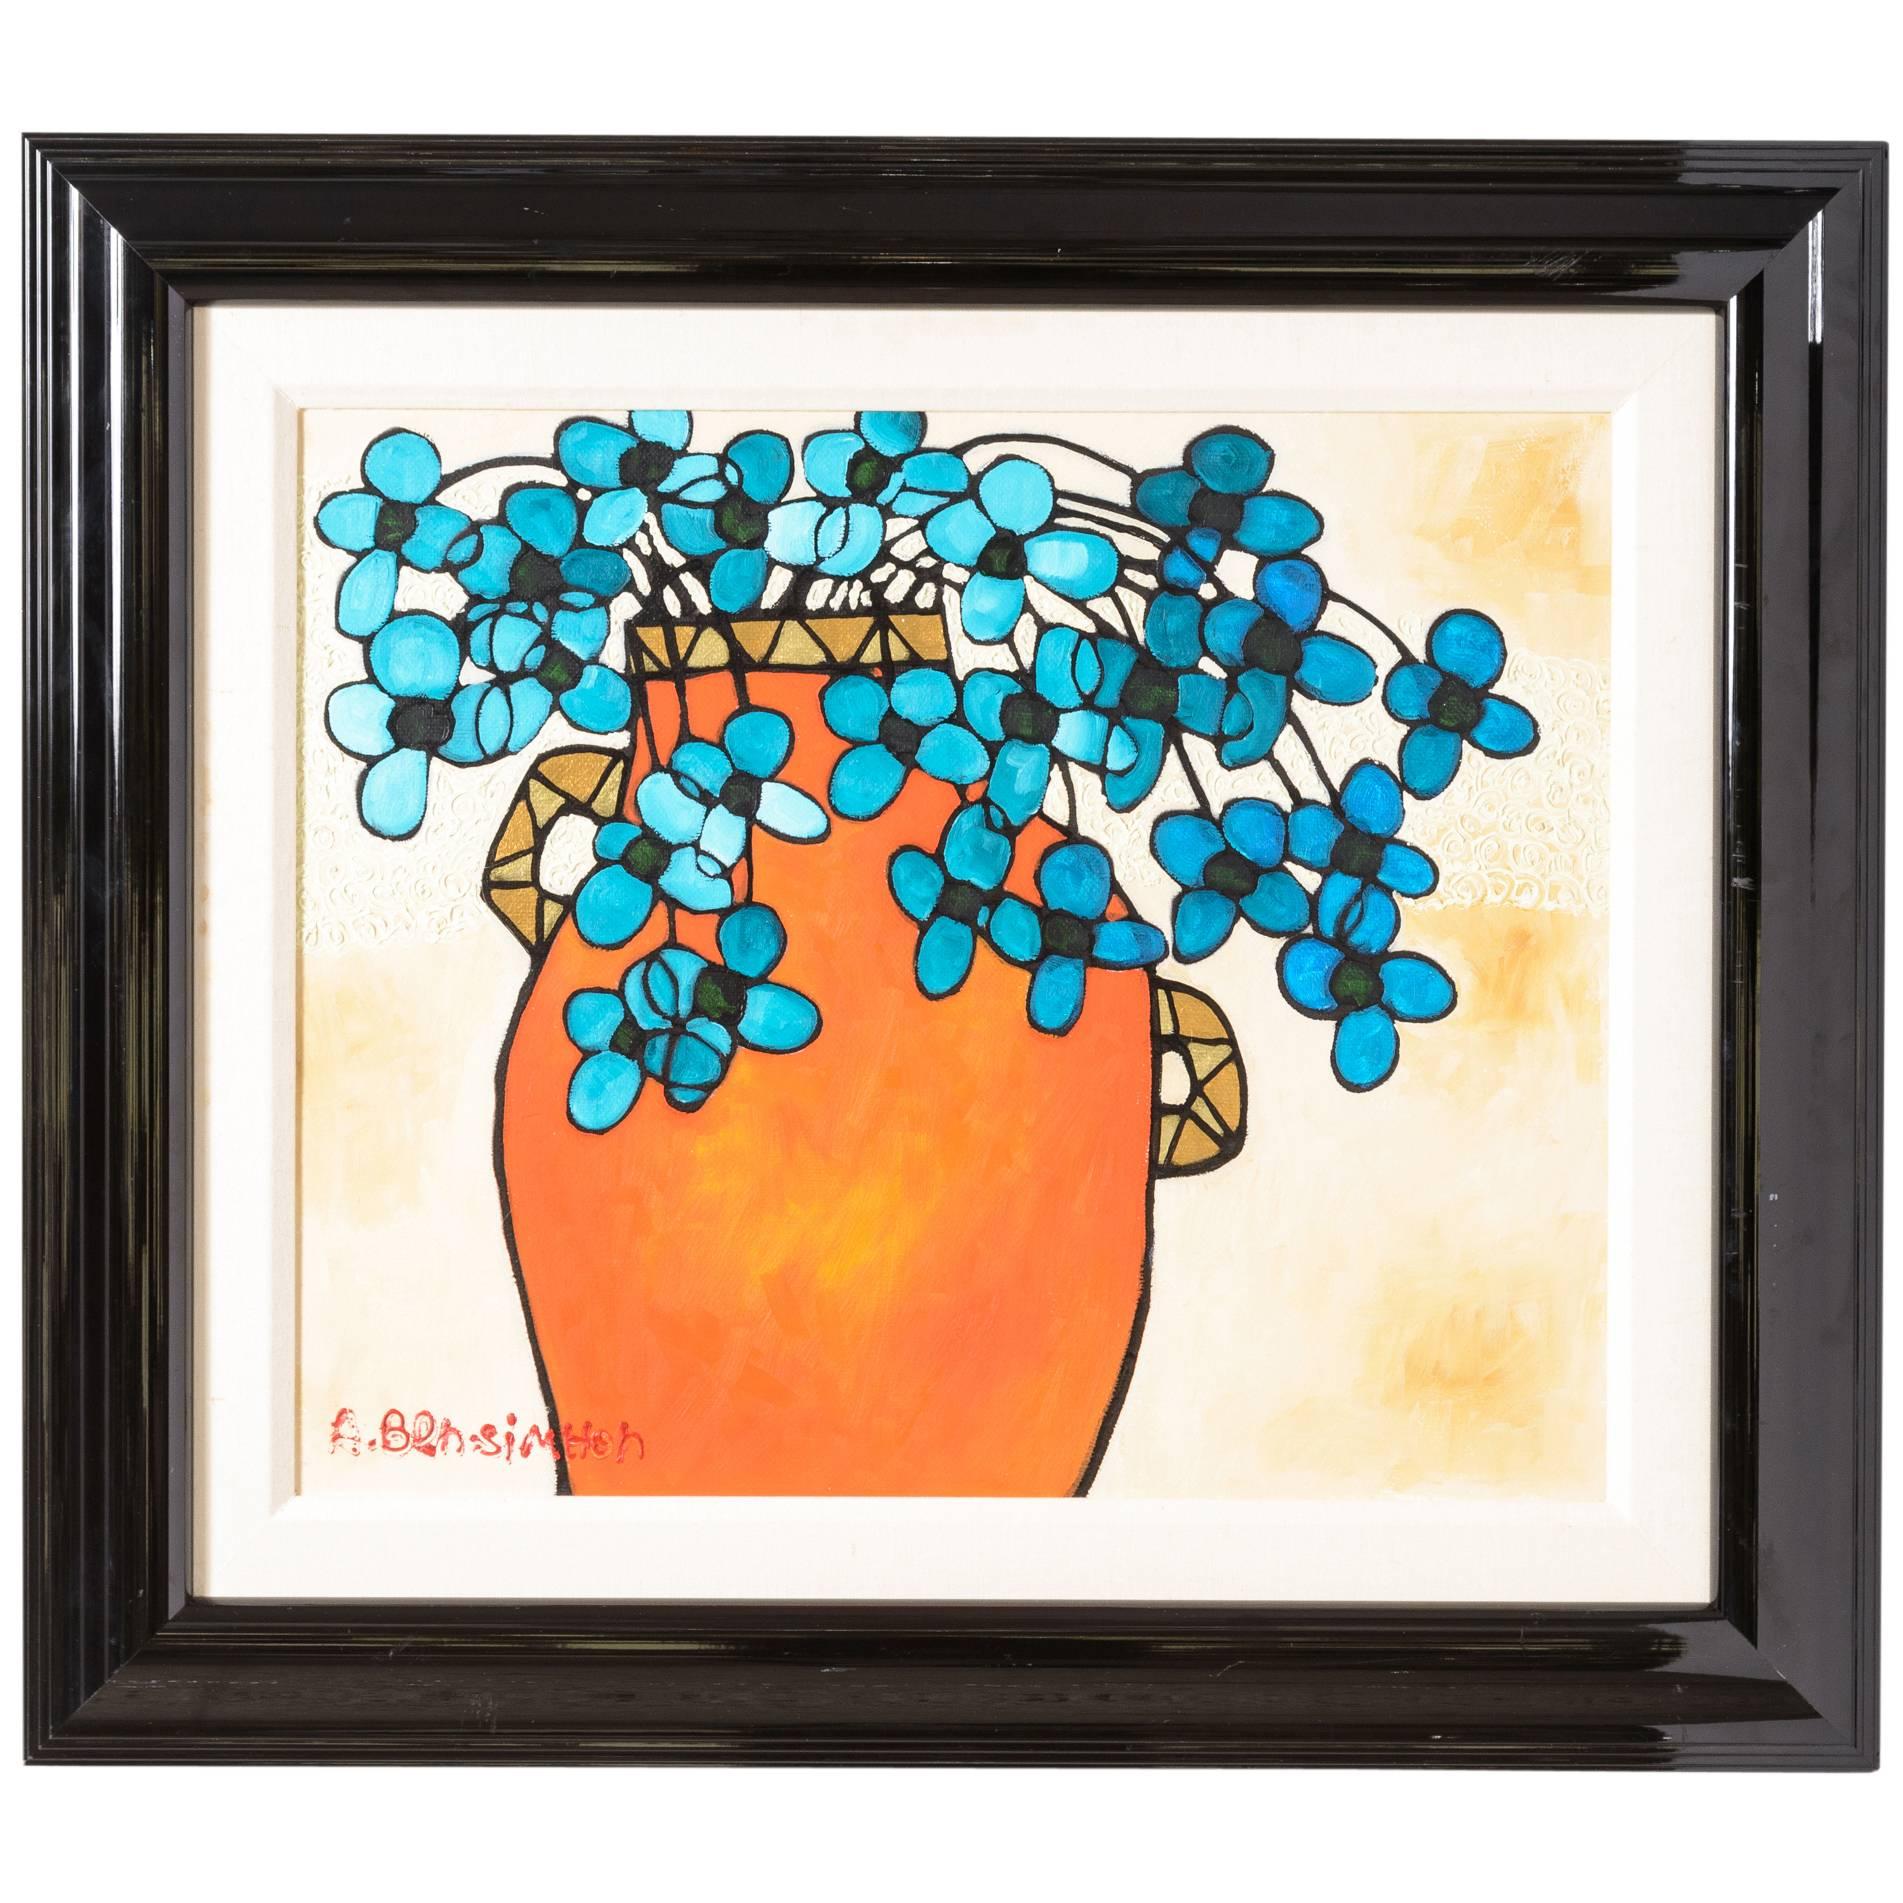 Oil on Canvas Painting of Blue Flowers in a Vase by Avi Ben Simhon